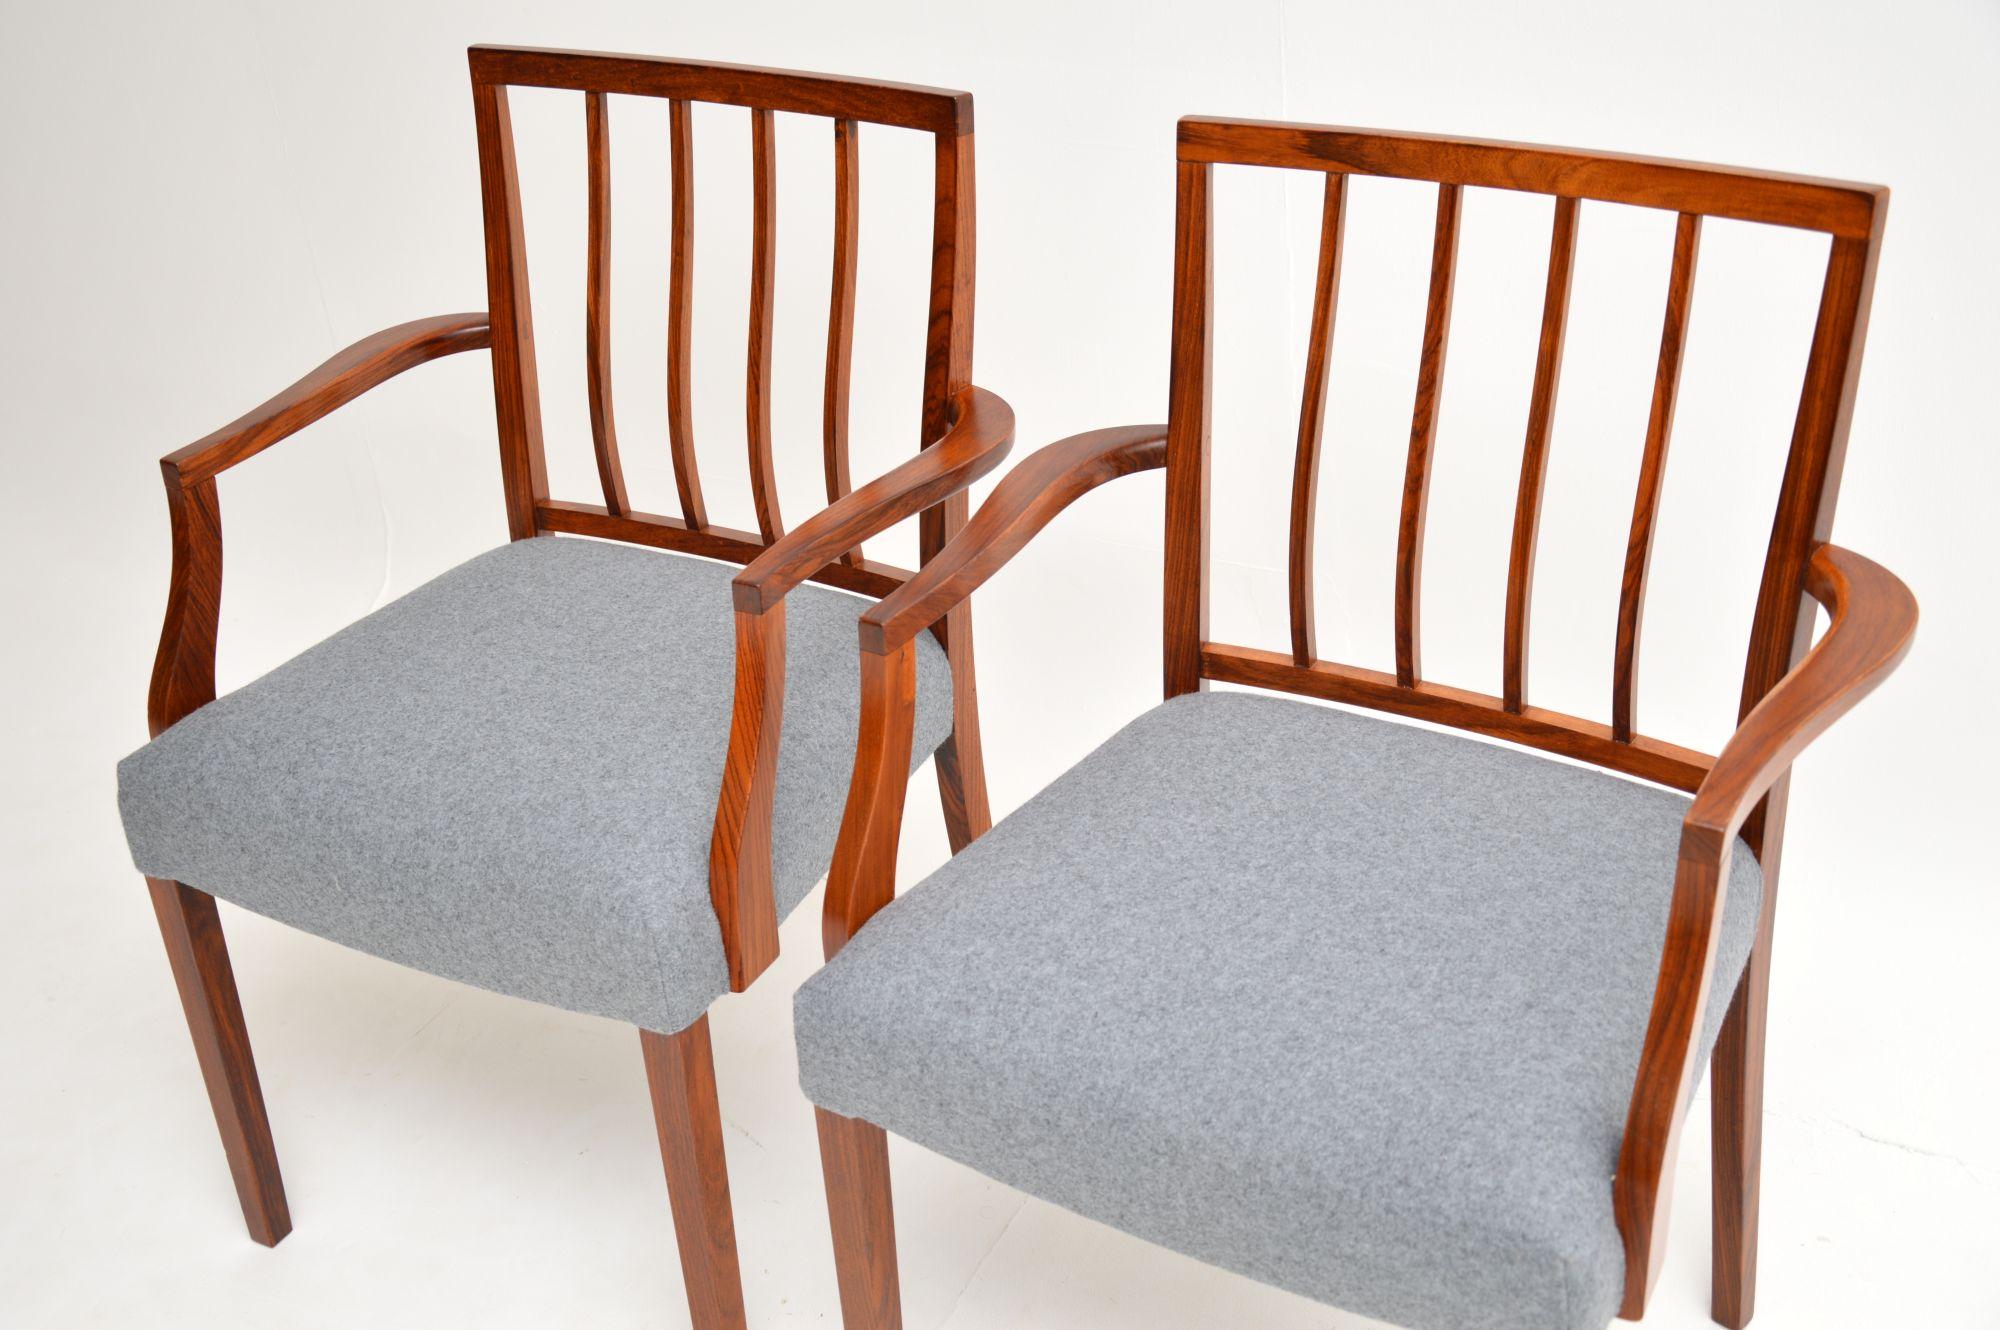 A stunning and very rare pair of carver chairs. These were designed by Robert Heritage as part of the Dorrington range, they were made by Archie Shine in London during the 1960’s.

The quality is superb, these are beautifully designed and executed.